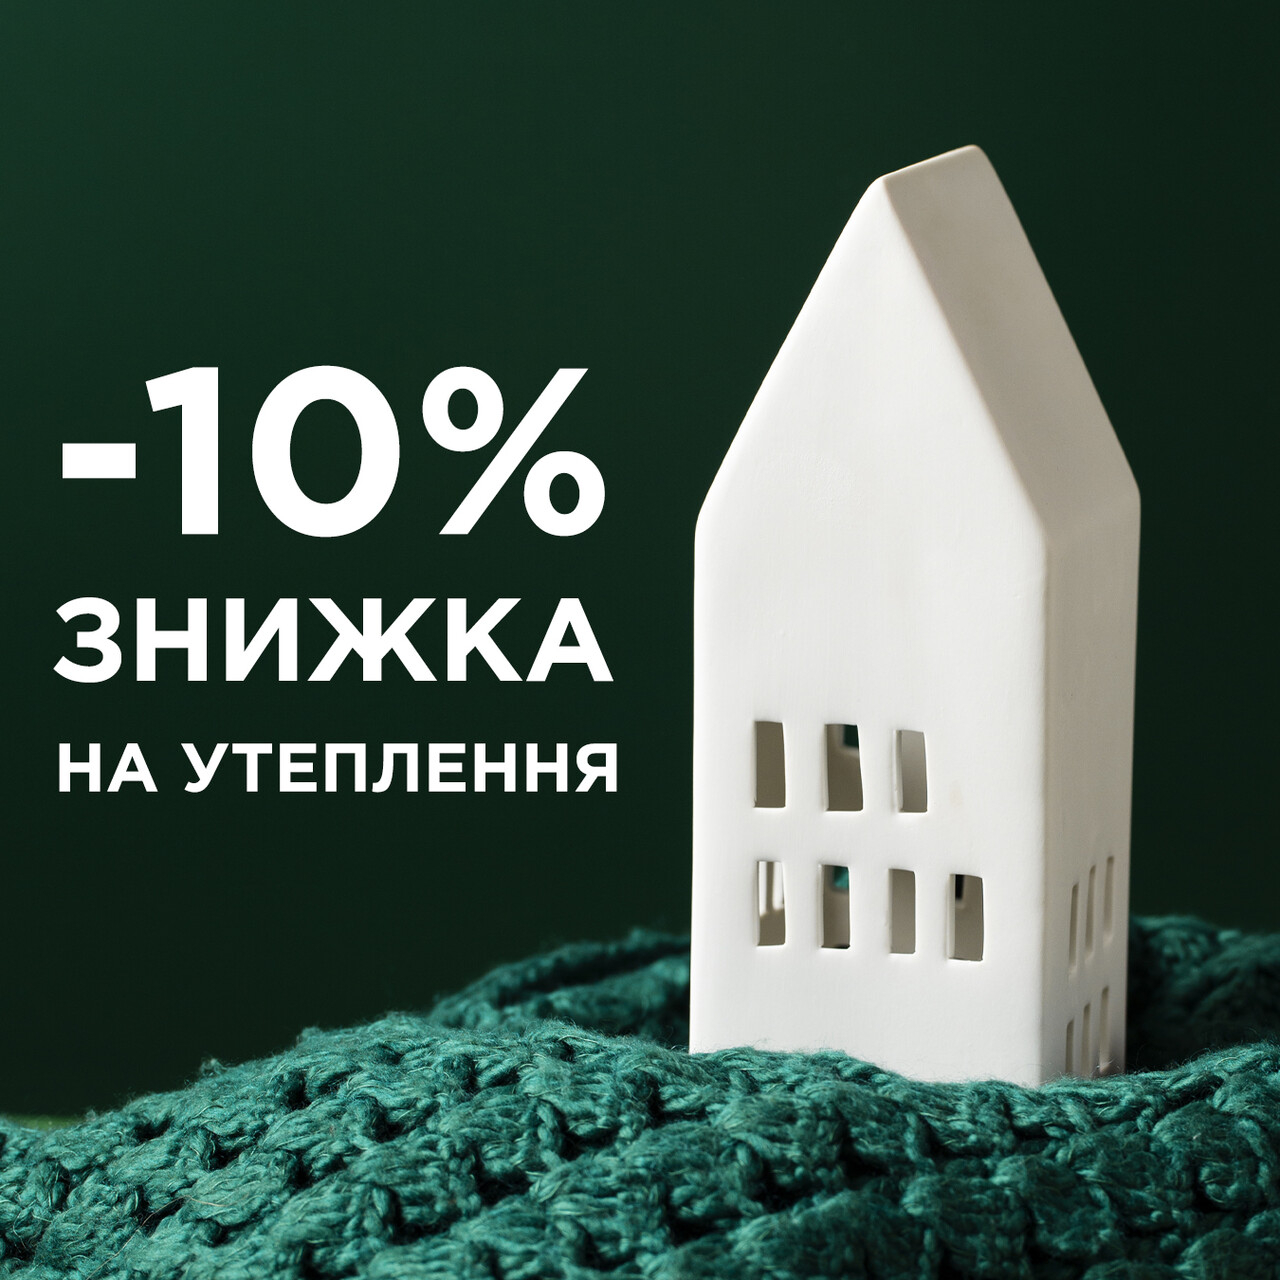 The Repair House gives a 10% discount on collective warming!